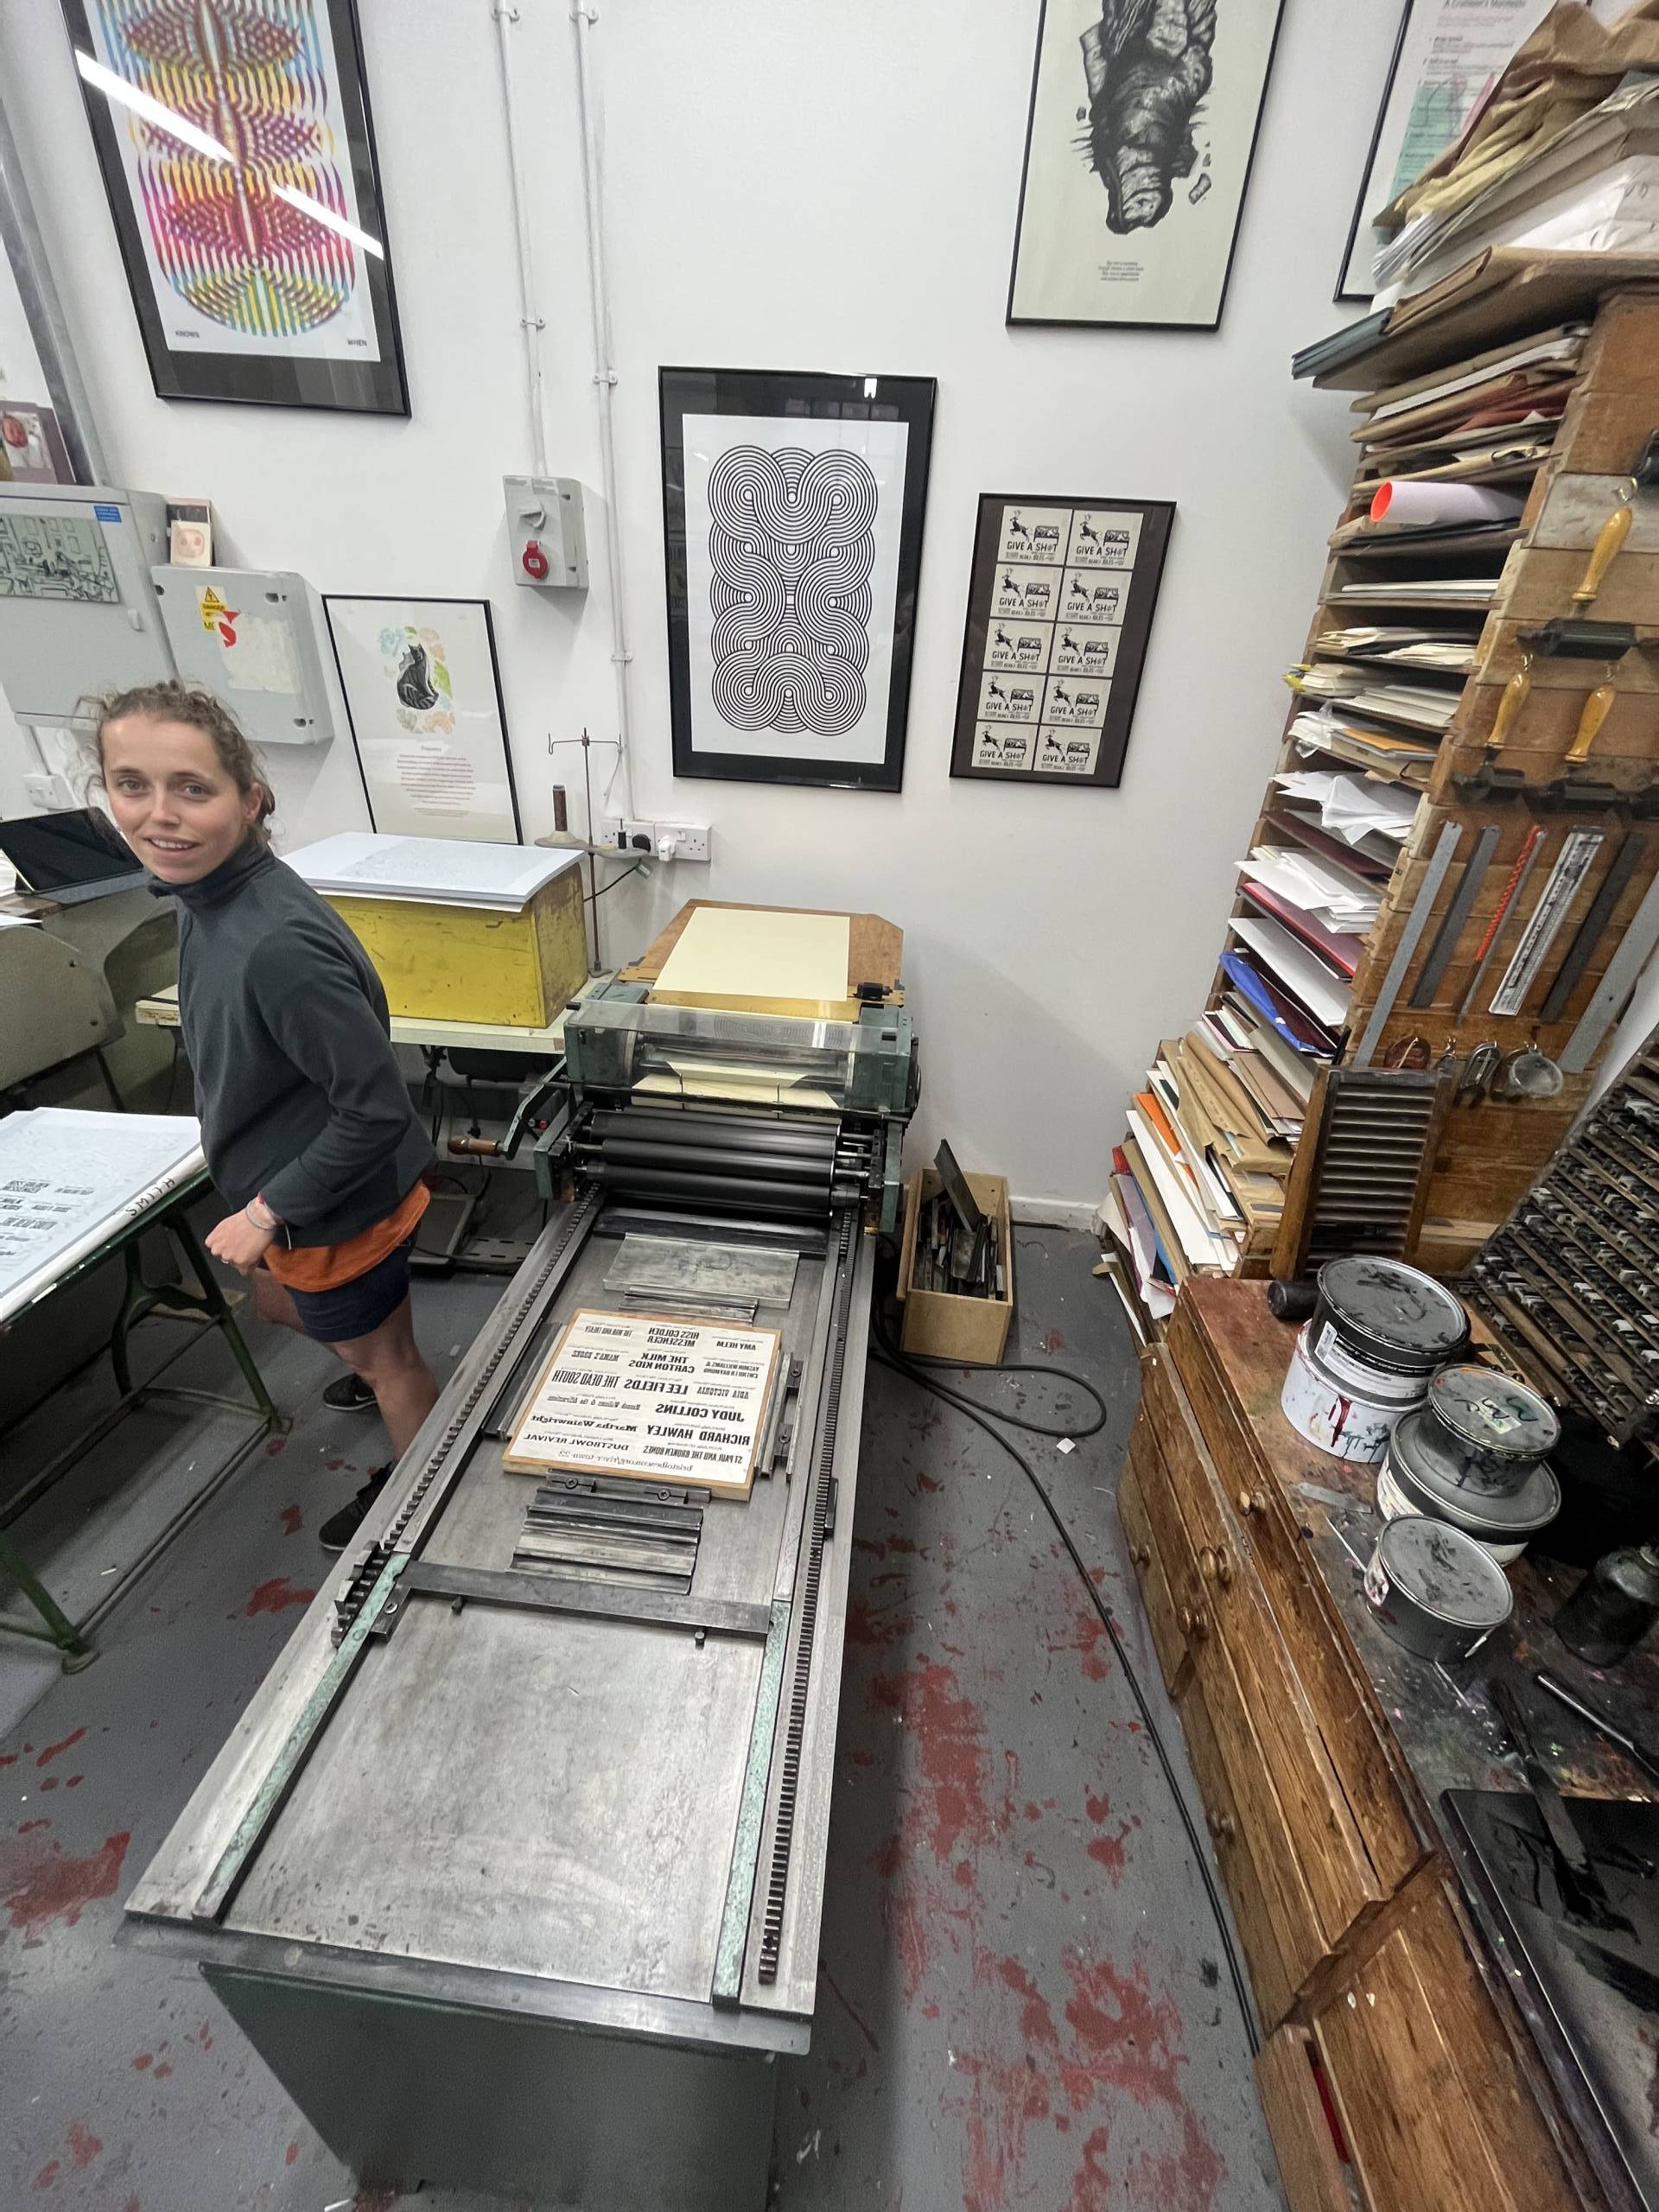 A woman stands next to a large metal printing press surrounded by shelves of inks and letter stamps.